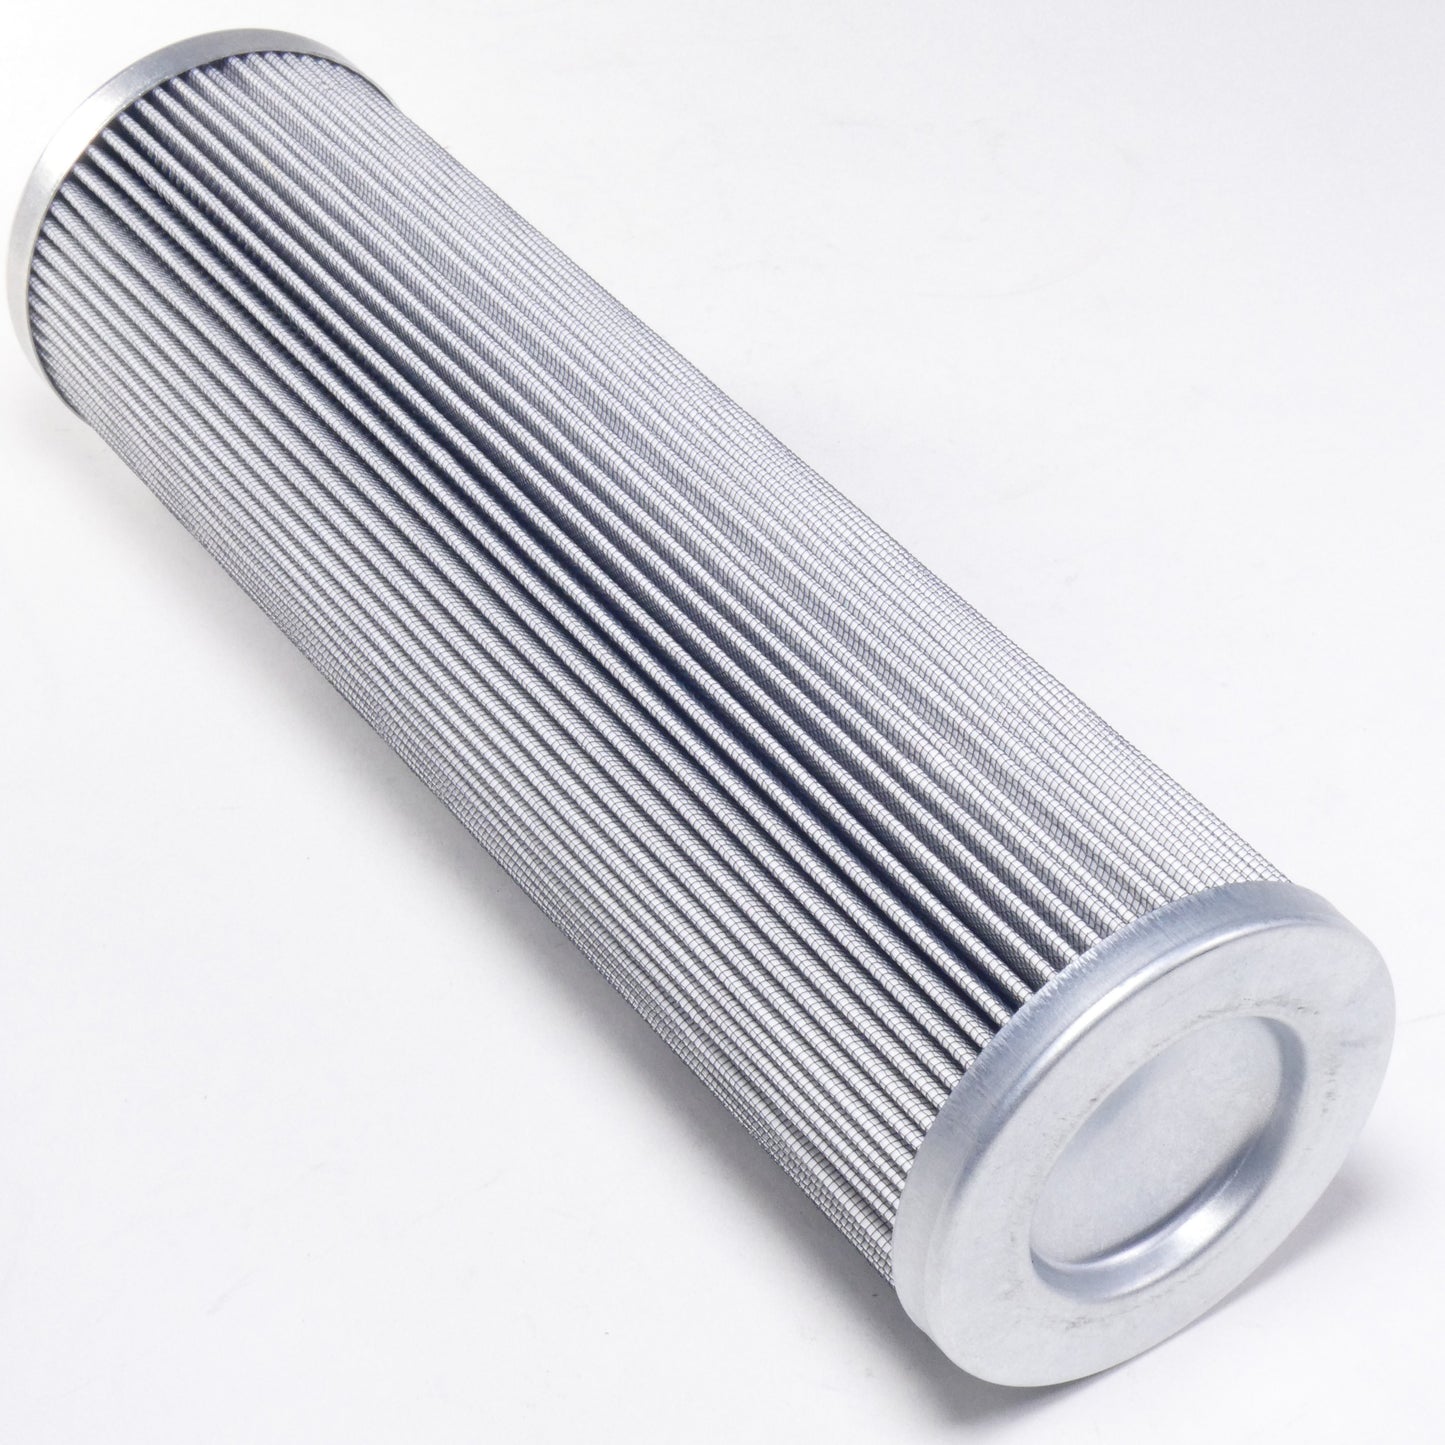 Hydrafil Replacement Filter Element for Hycoa V134-0120-V-1